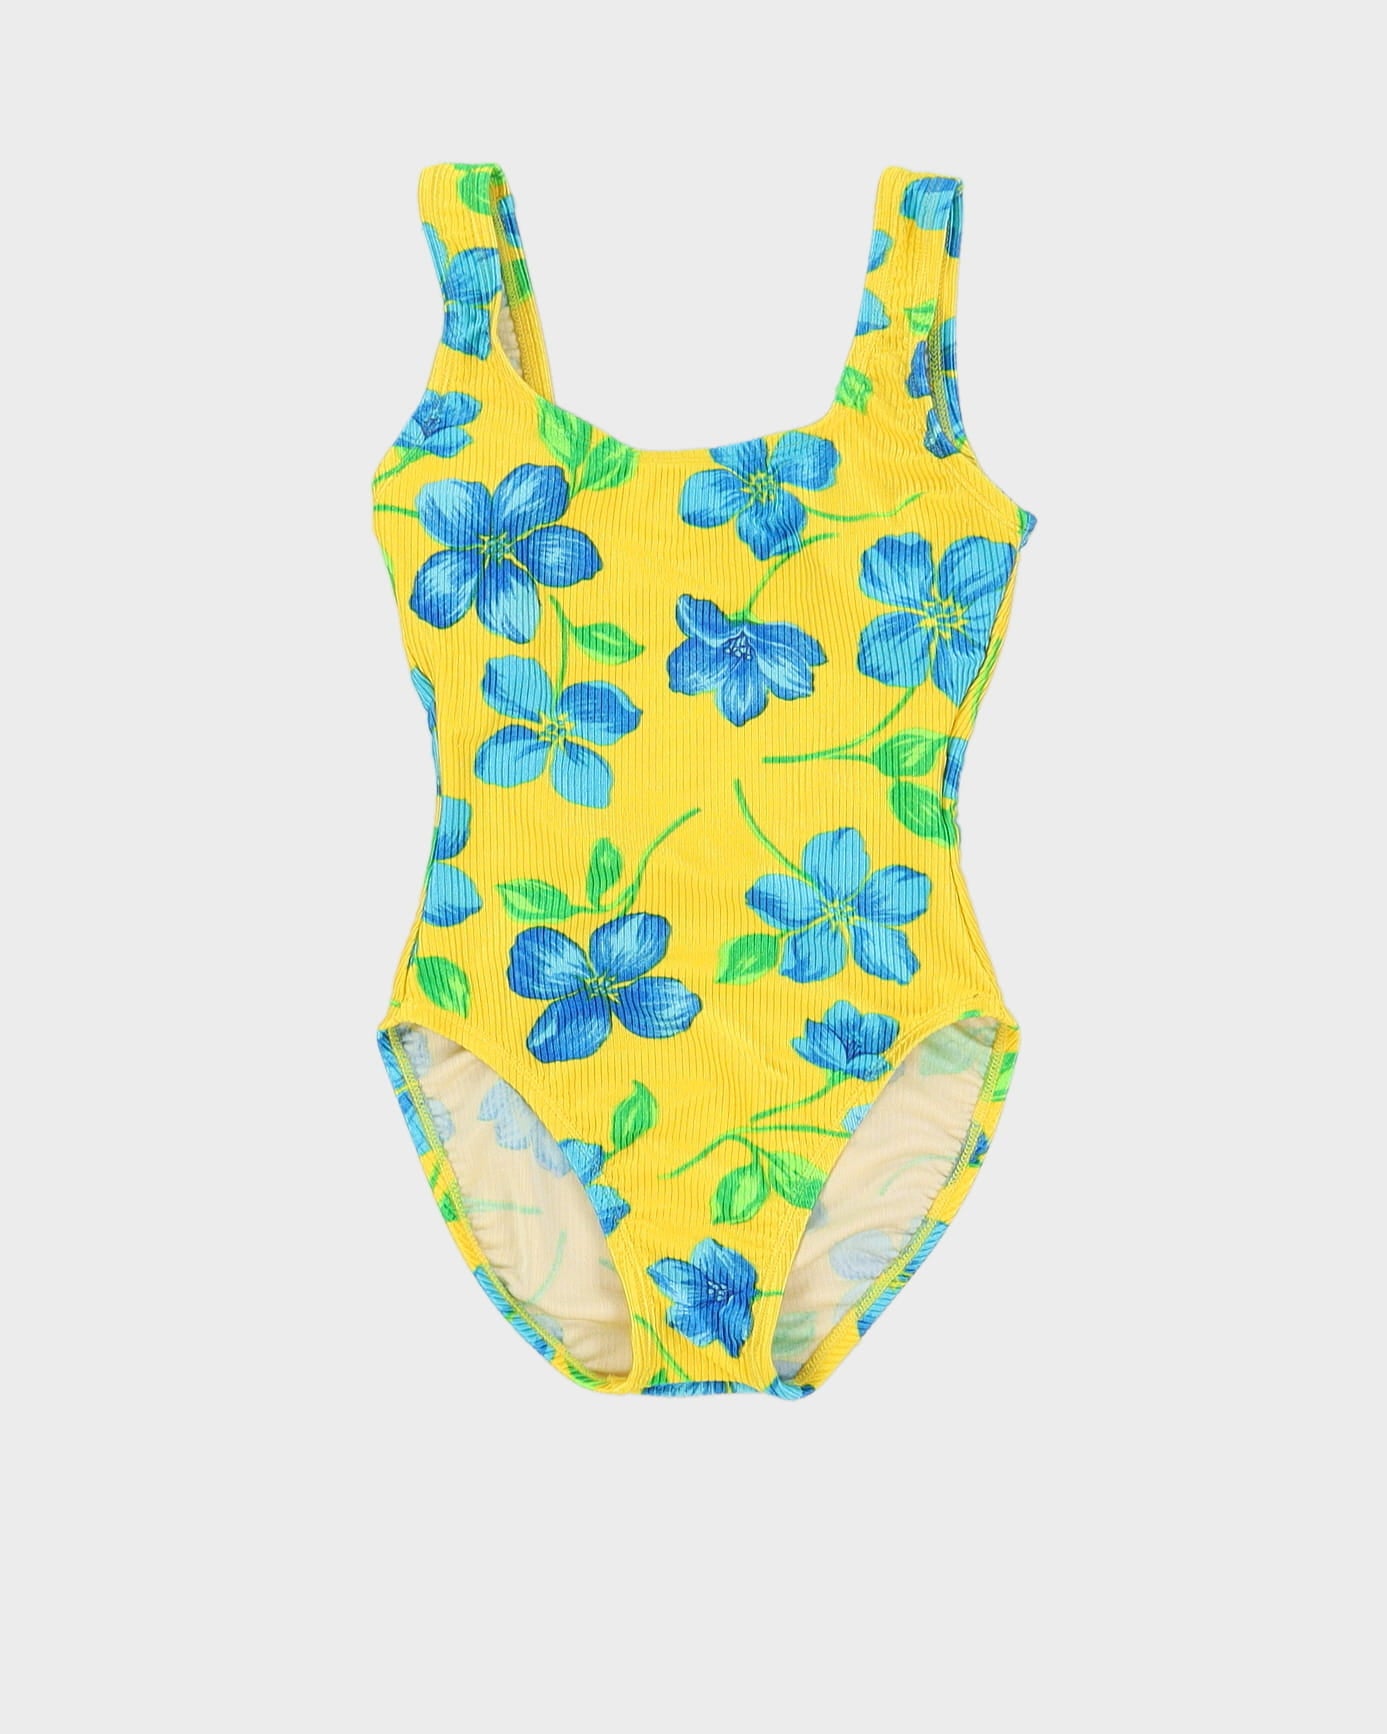 Catalina Yellow With Blue Flowers Swimsuit - S